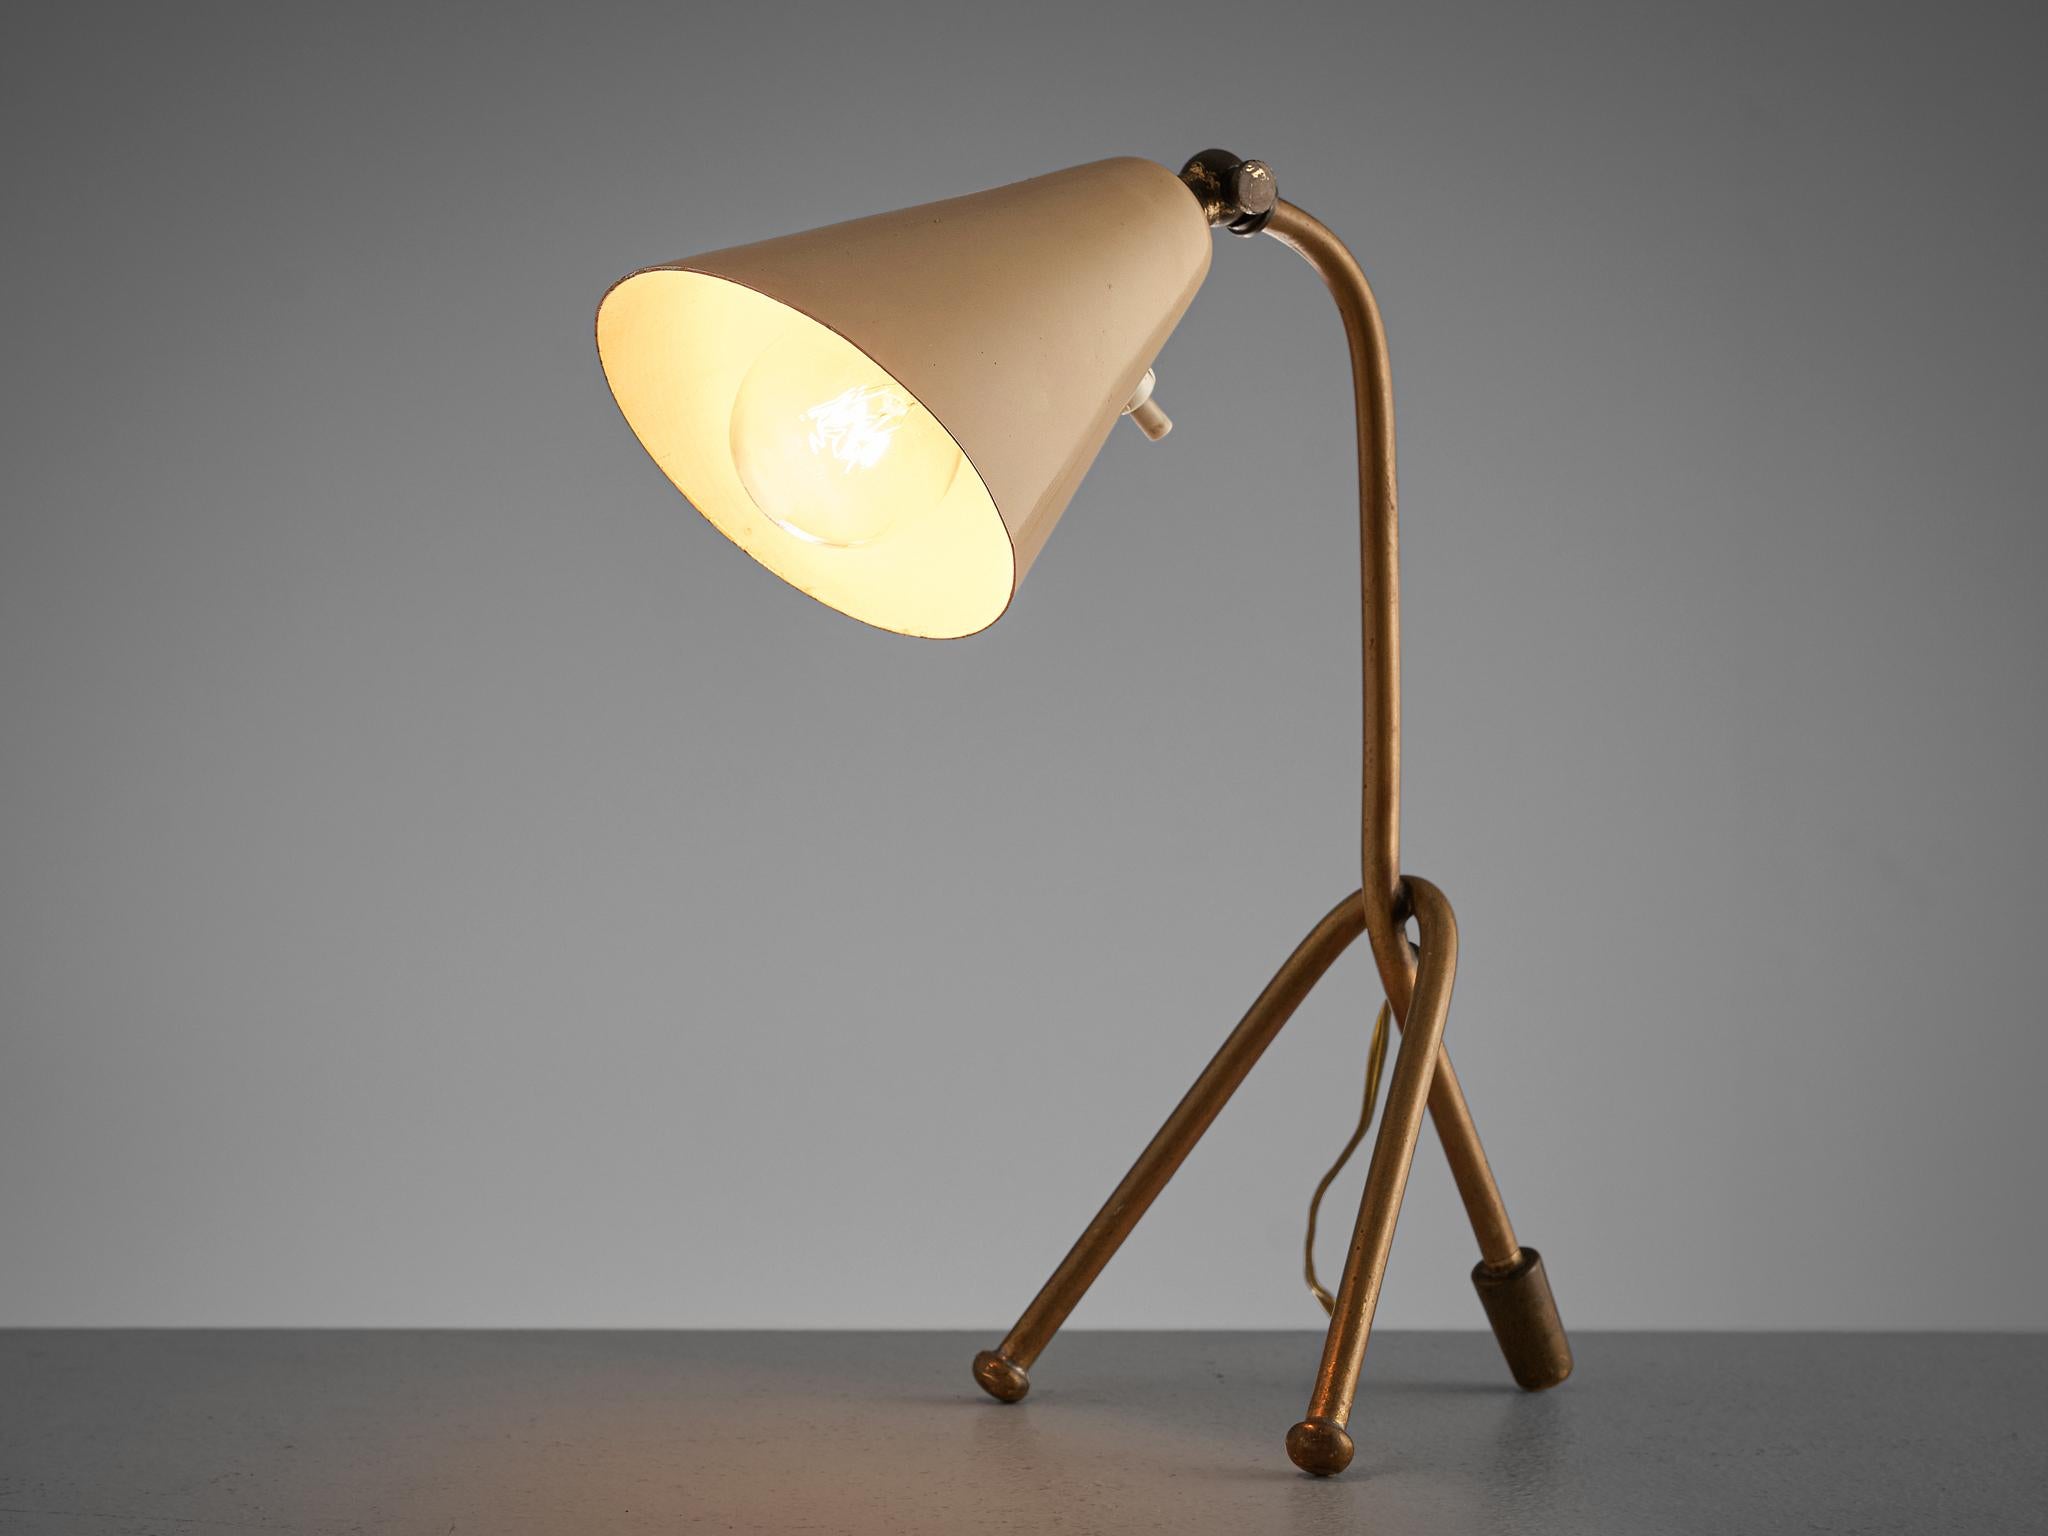 Desk light, metal and brass, Italy, 1960s

Italian table lamp with tripod base. The lamp features a gold brass base and a beige stem which is colored white in the inside. The shade can be positioned in different direction, which makes it very